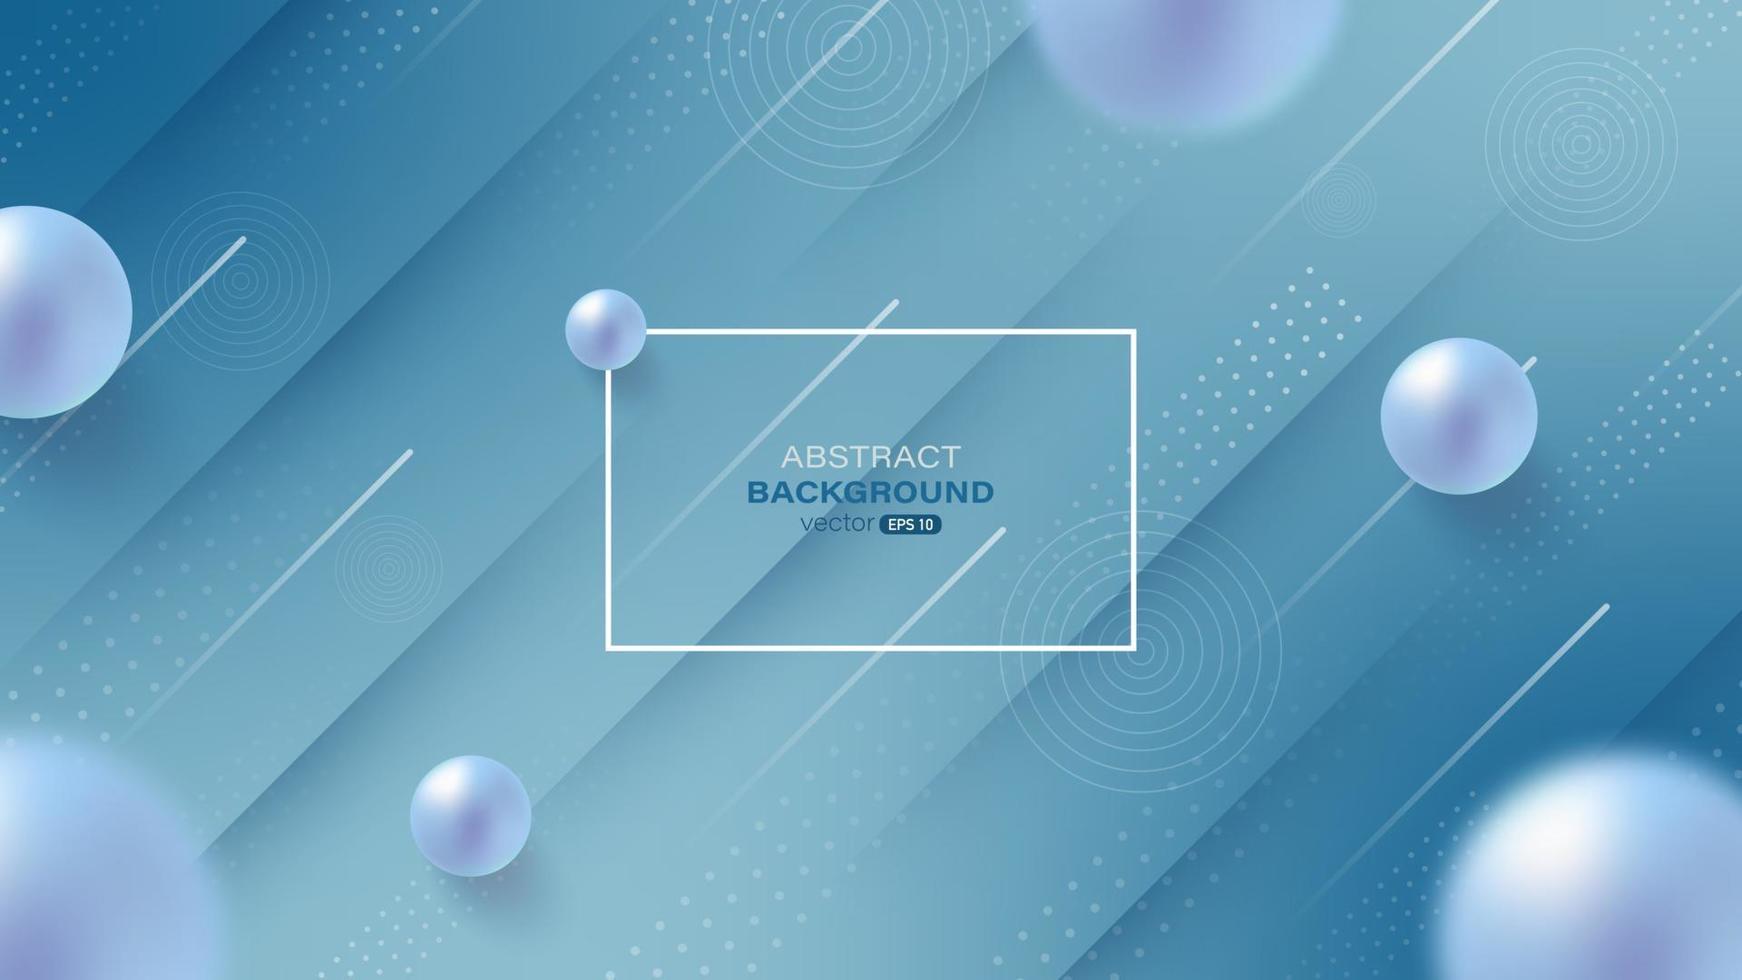 Blue gradient background with abstract geometric shape vector